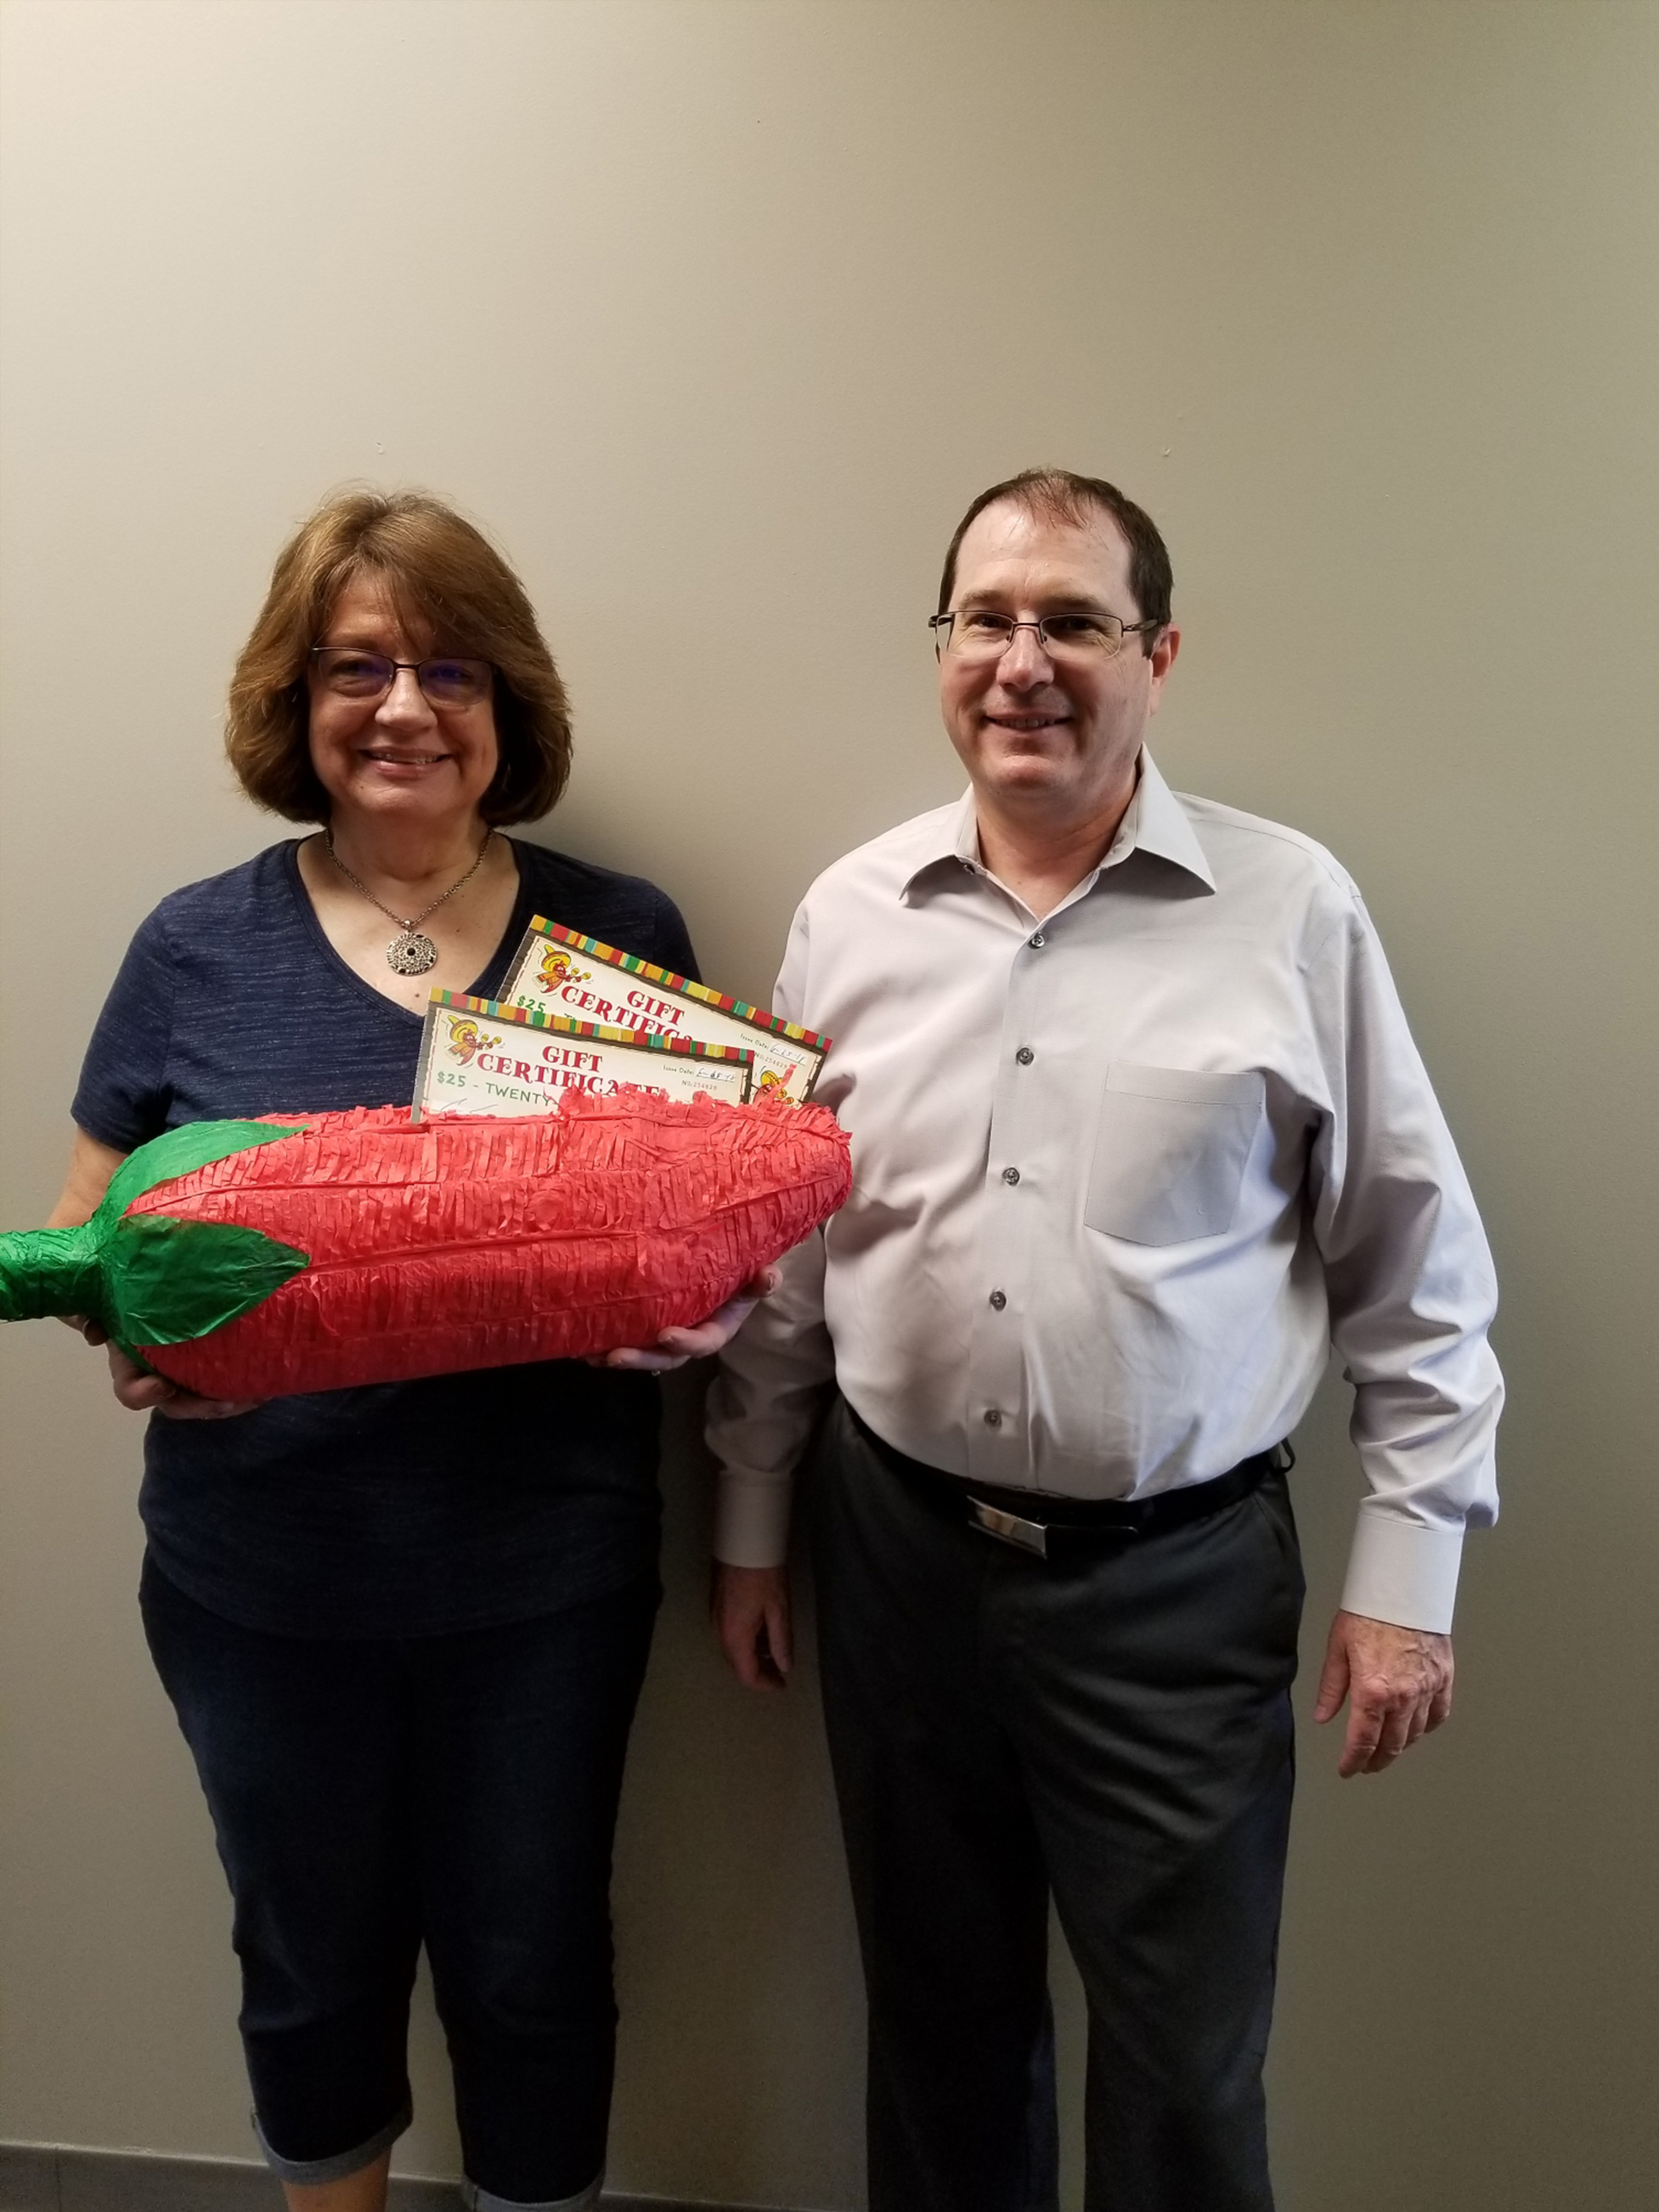 Congratulations to our Patient Appreciation contest winner Kathleen. She received a Fifty dollar gift
certificate to Jalapenos Restaurant.